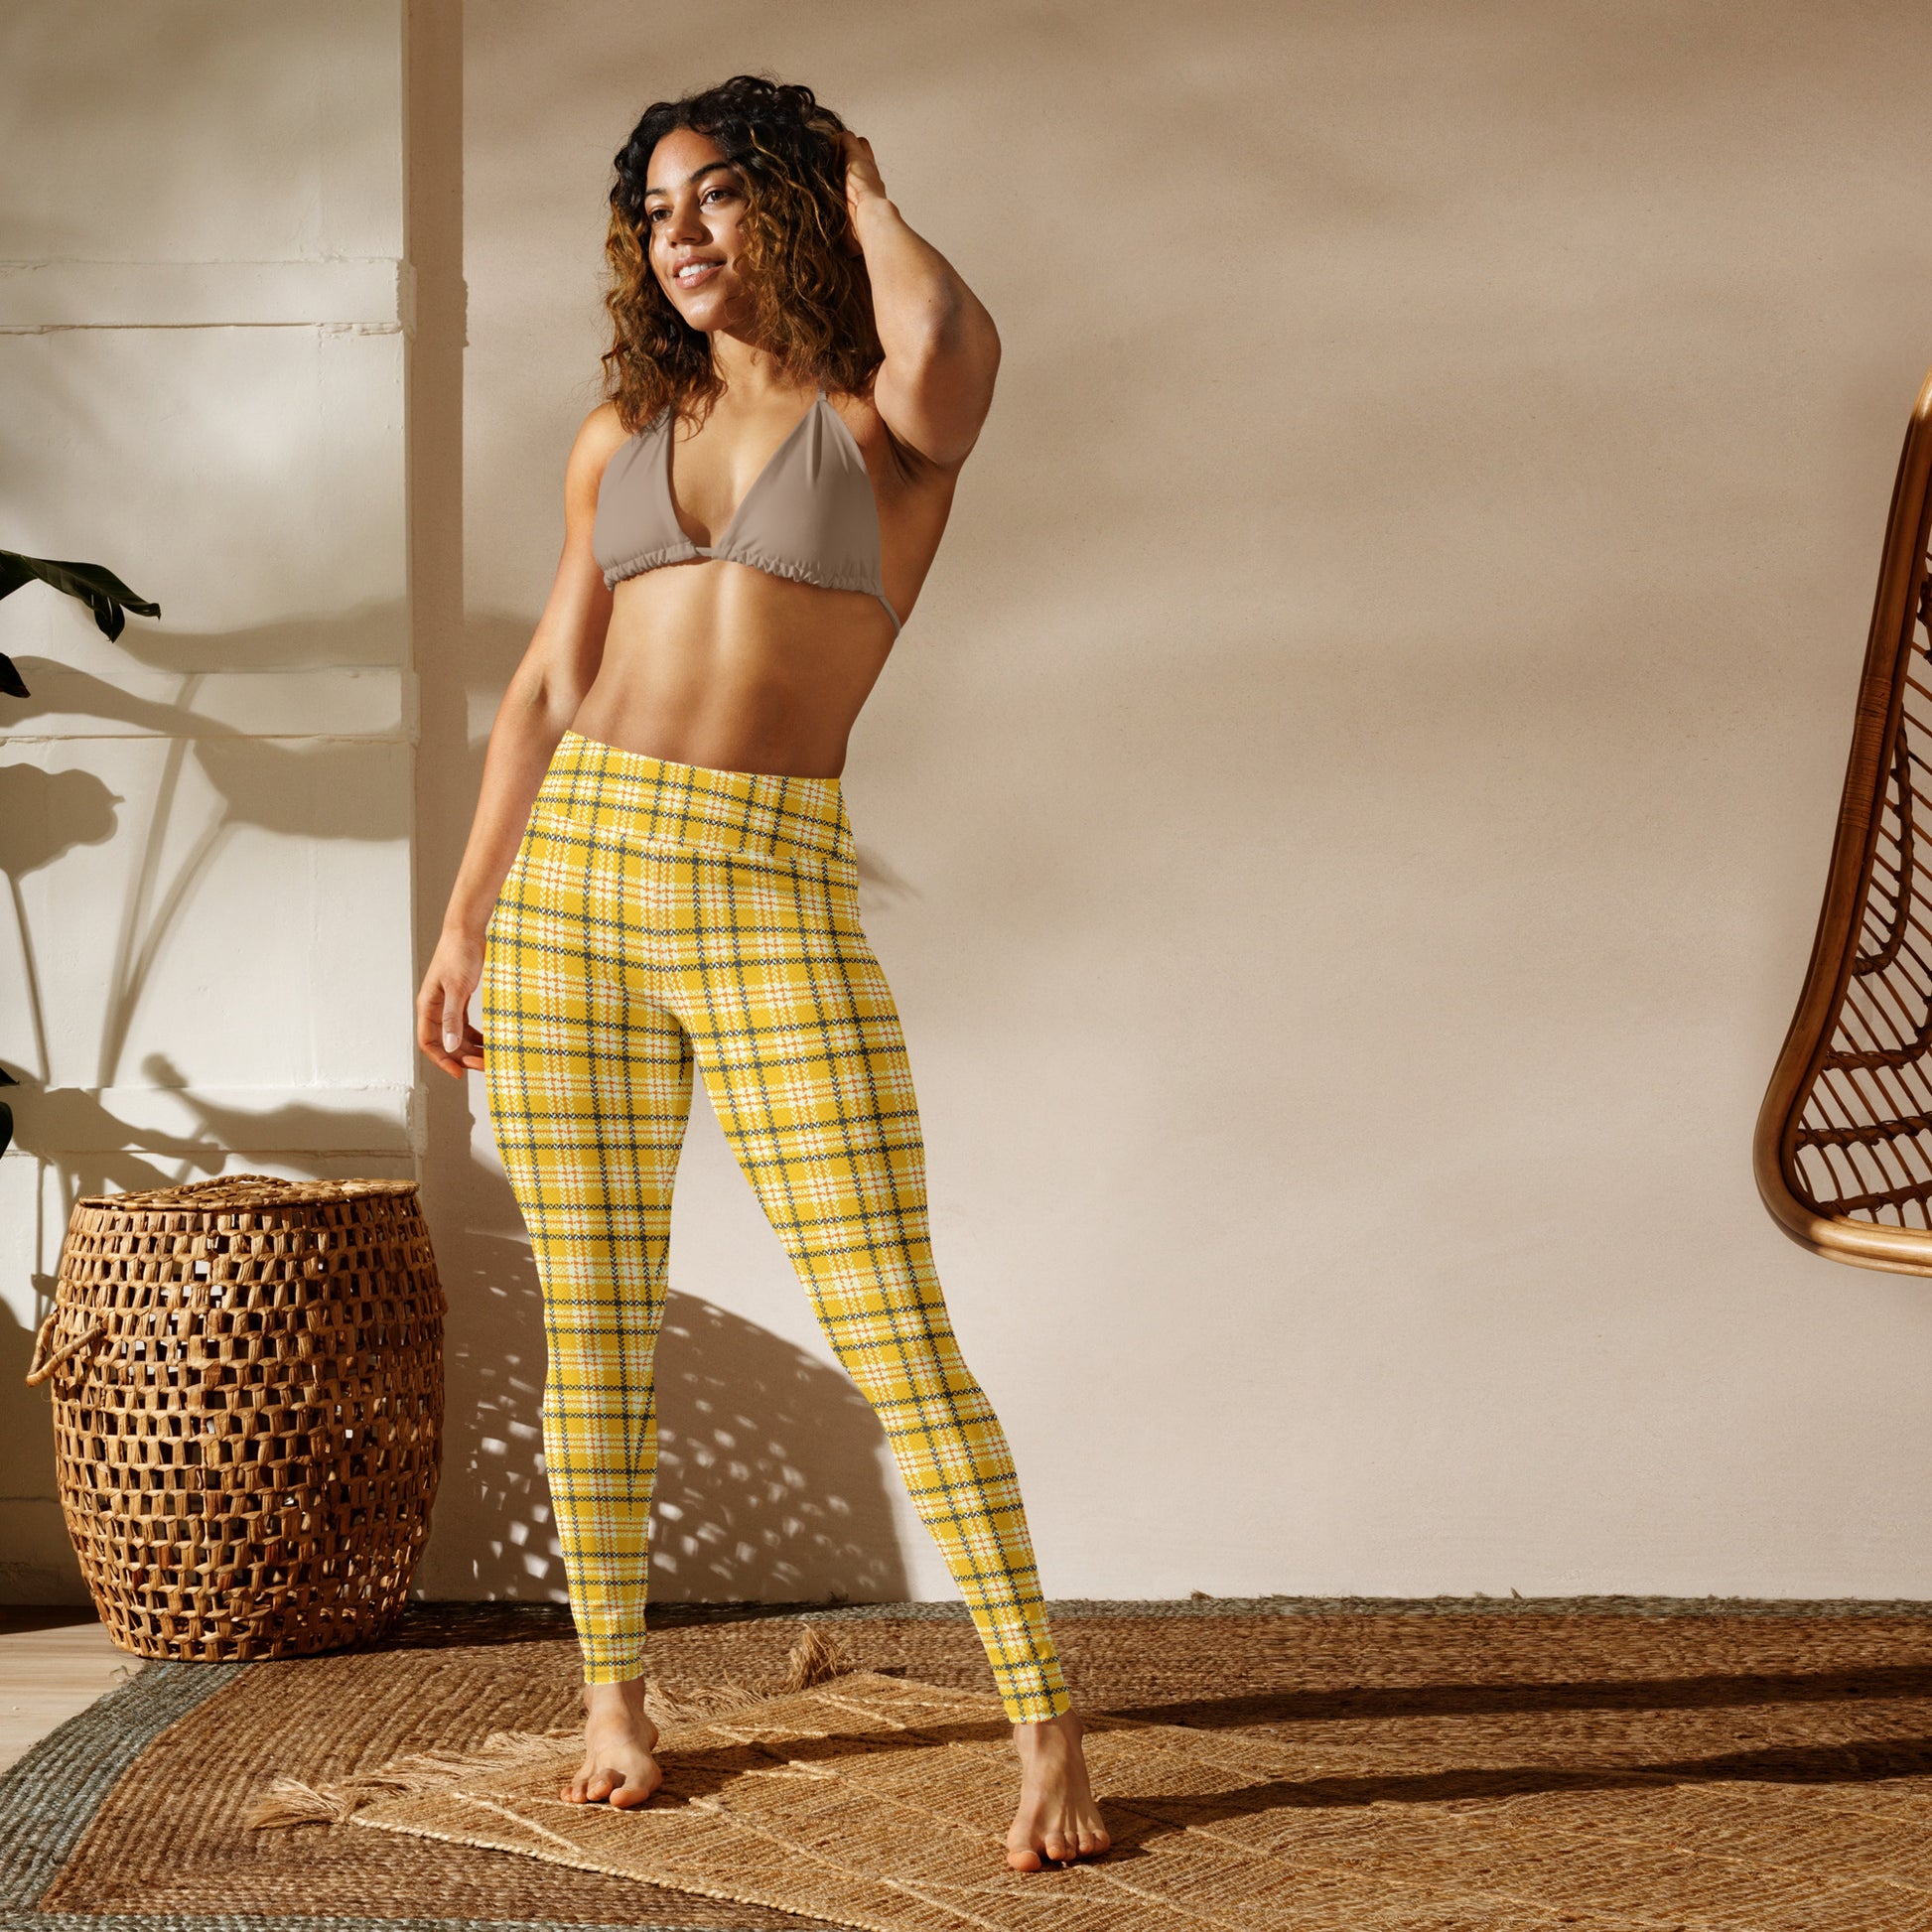 Yellow Activewear outfit  Active wear outfits, Outfits, Cute outfits